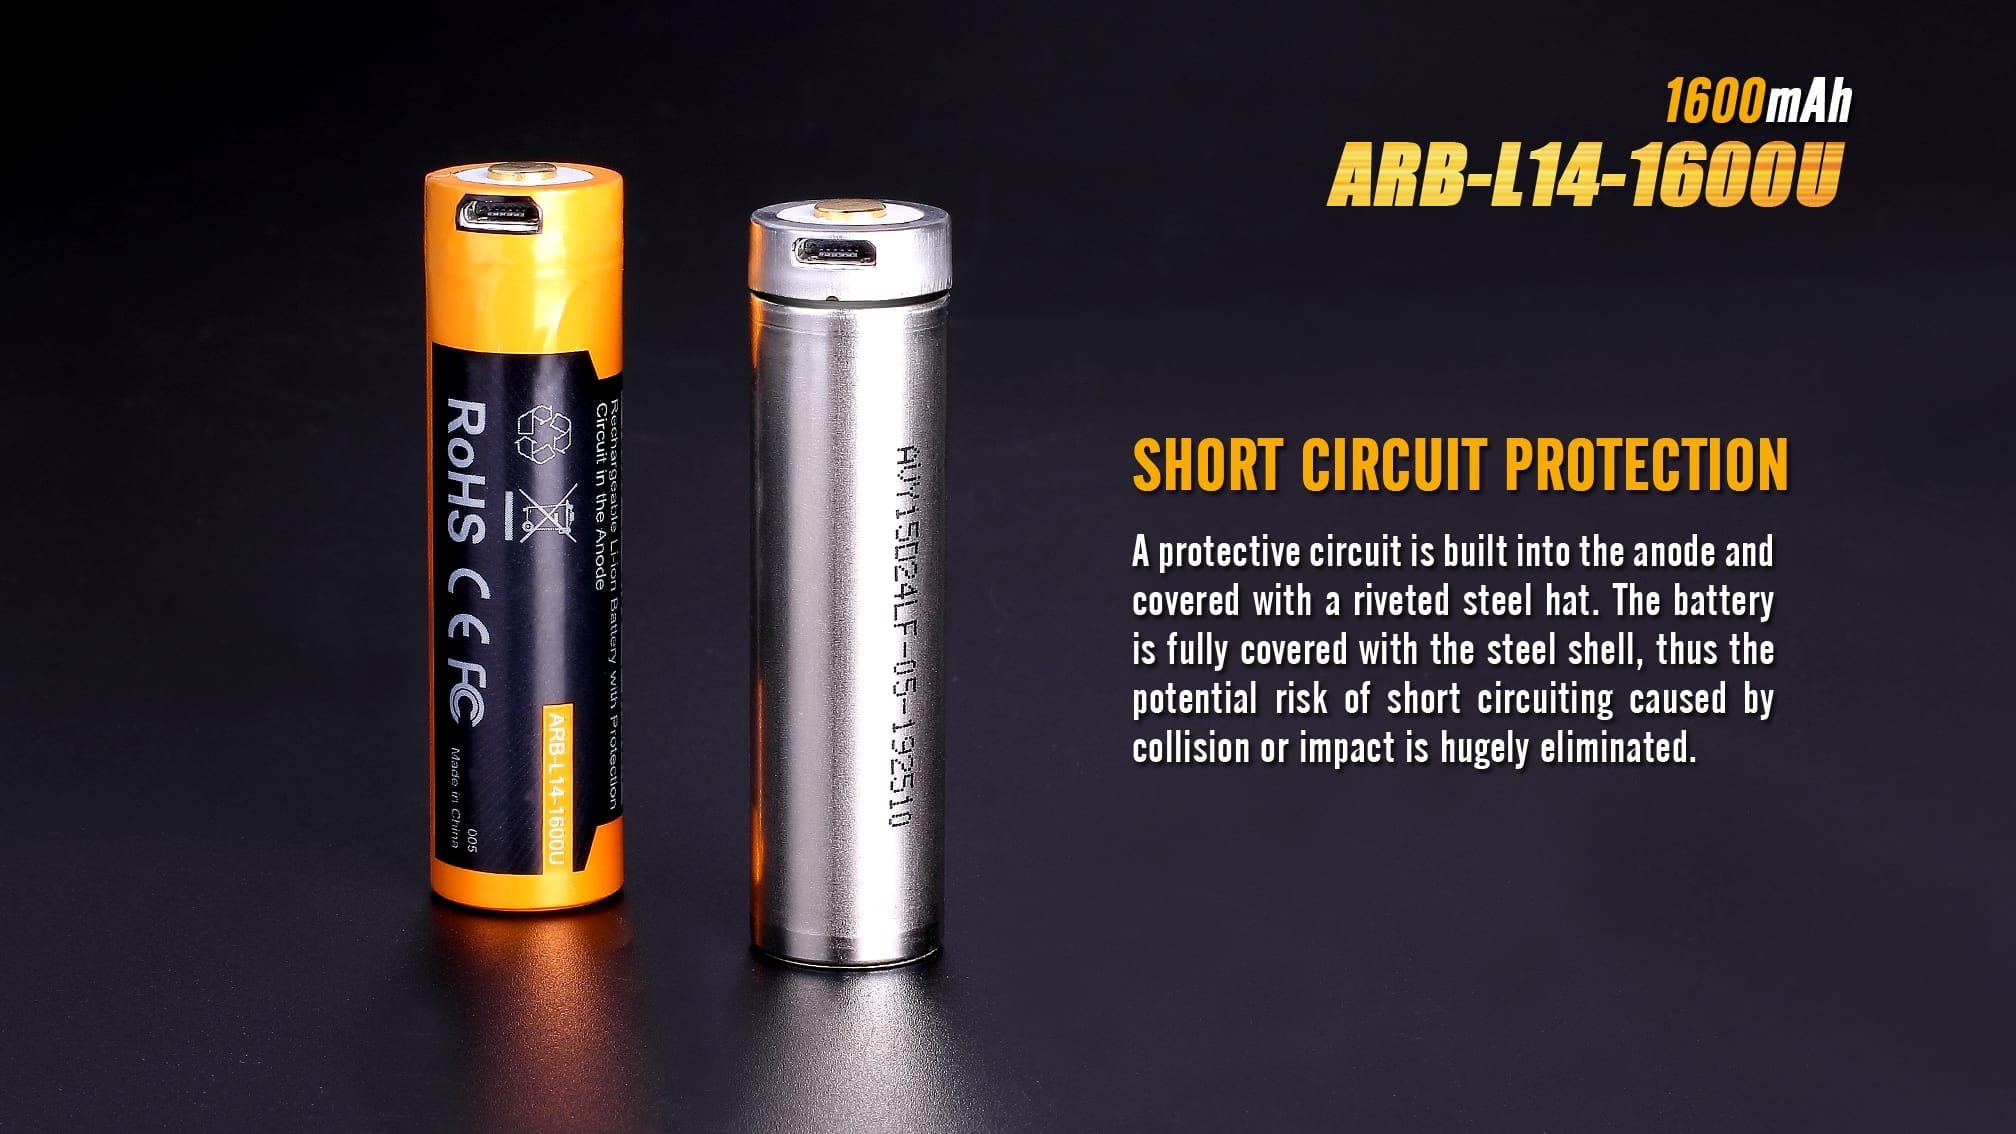 ARB-L14-1600U Built-in USB Rechargeable Battery